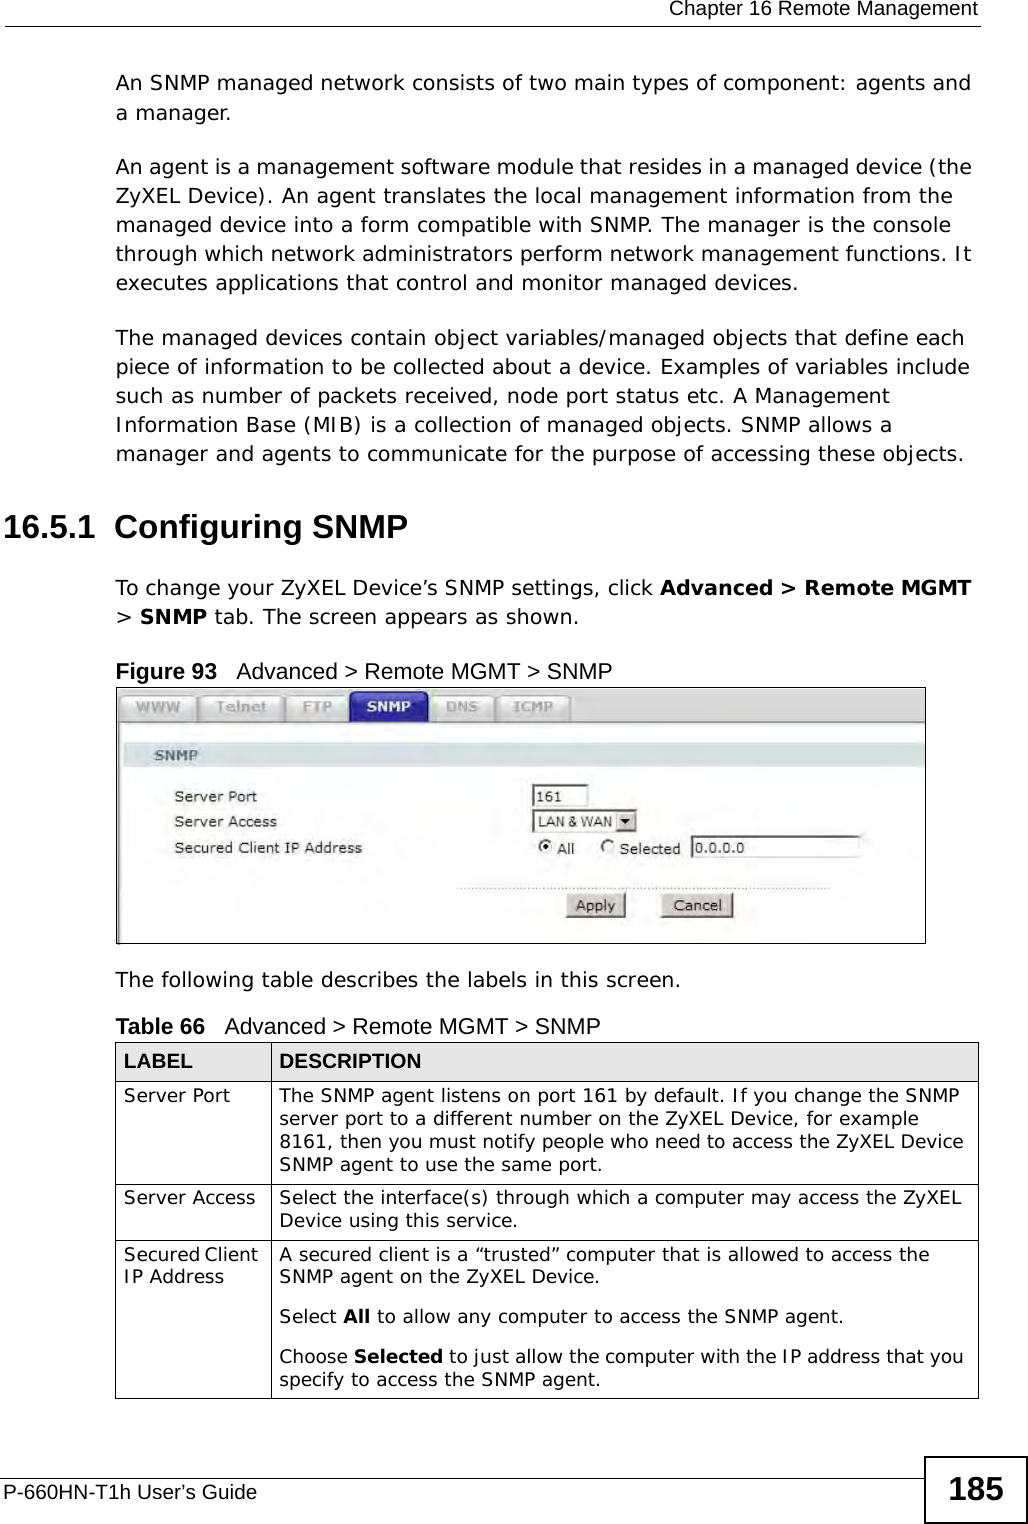  Chapter 16 Remote ManagementP-660HN-T1h User’s Guide 185An SNMP managed network consists of two main types of component: agents and a manager. An agent is a management software module that resides in a managed device (the ZyXEL Device). An agent translates the local management information from the managed device into a form compatible with SNMP. The manager is the console through which network administrators perform network management functions. It executes applications that control and monitor managed devices. The managed devices contain object variables/managed objects that define each piece of information to be collected about a device. Examples of variables include such as number of packets received, node port status etc. A Management Information Base (MIB) is a collection of managed objects. SNMP allows a manager and agents to communicate for the purpose of accessing these objects.16.5.1  Configuring SNMP To change your ZyXEL Device’s SNMP settings, click Advanced &gt; Remote MGMT &gt; SNMP tab. The screen appears as shown.Figure 93   Advanced &gt; Remote MGMT &gt; SNMPThe following table describes the labels in this screen.Table 66   Advanced &gt; Remote MGMT &gt; SNMPLABEL DESCRIPTIONServer Port The SNMP agent listens on port 161 by default. If you change the SNMP server port to a different number on the ZyXEL Device, for example 8161, then you must notify people who need to access the ZyXEL Device SNMP agent to use the same port.Server Access  Select the interface(s) through which a computer may access the ZyXEL Device using this service.Secured Client IP Address A secured client is a “trusted” computer that is allowed to access the SNMP agent on the ZyXEL Device.Select All to allow any computer to access the SNMP agent.Choose Selected to just allow the computer with the IP address that you specify to access the SNMP agent.